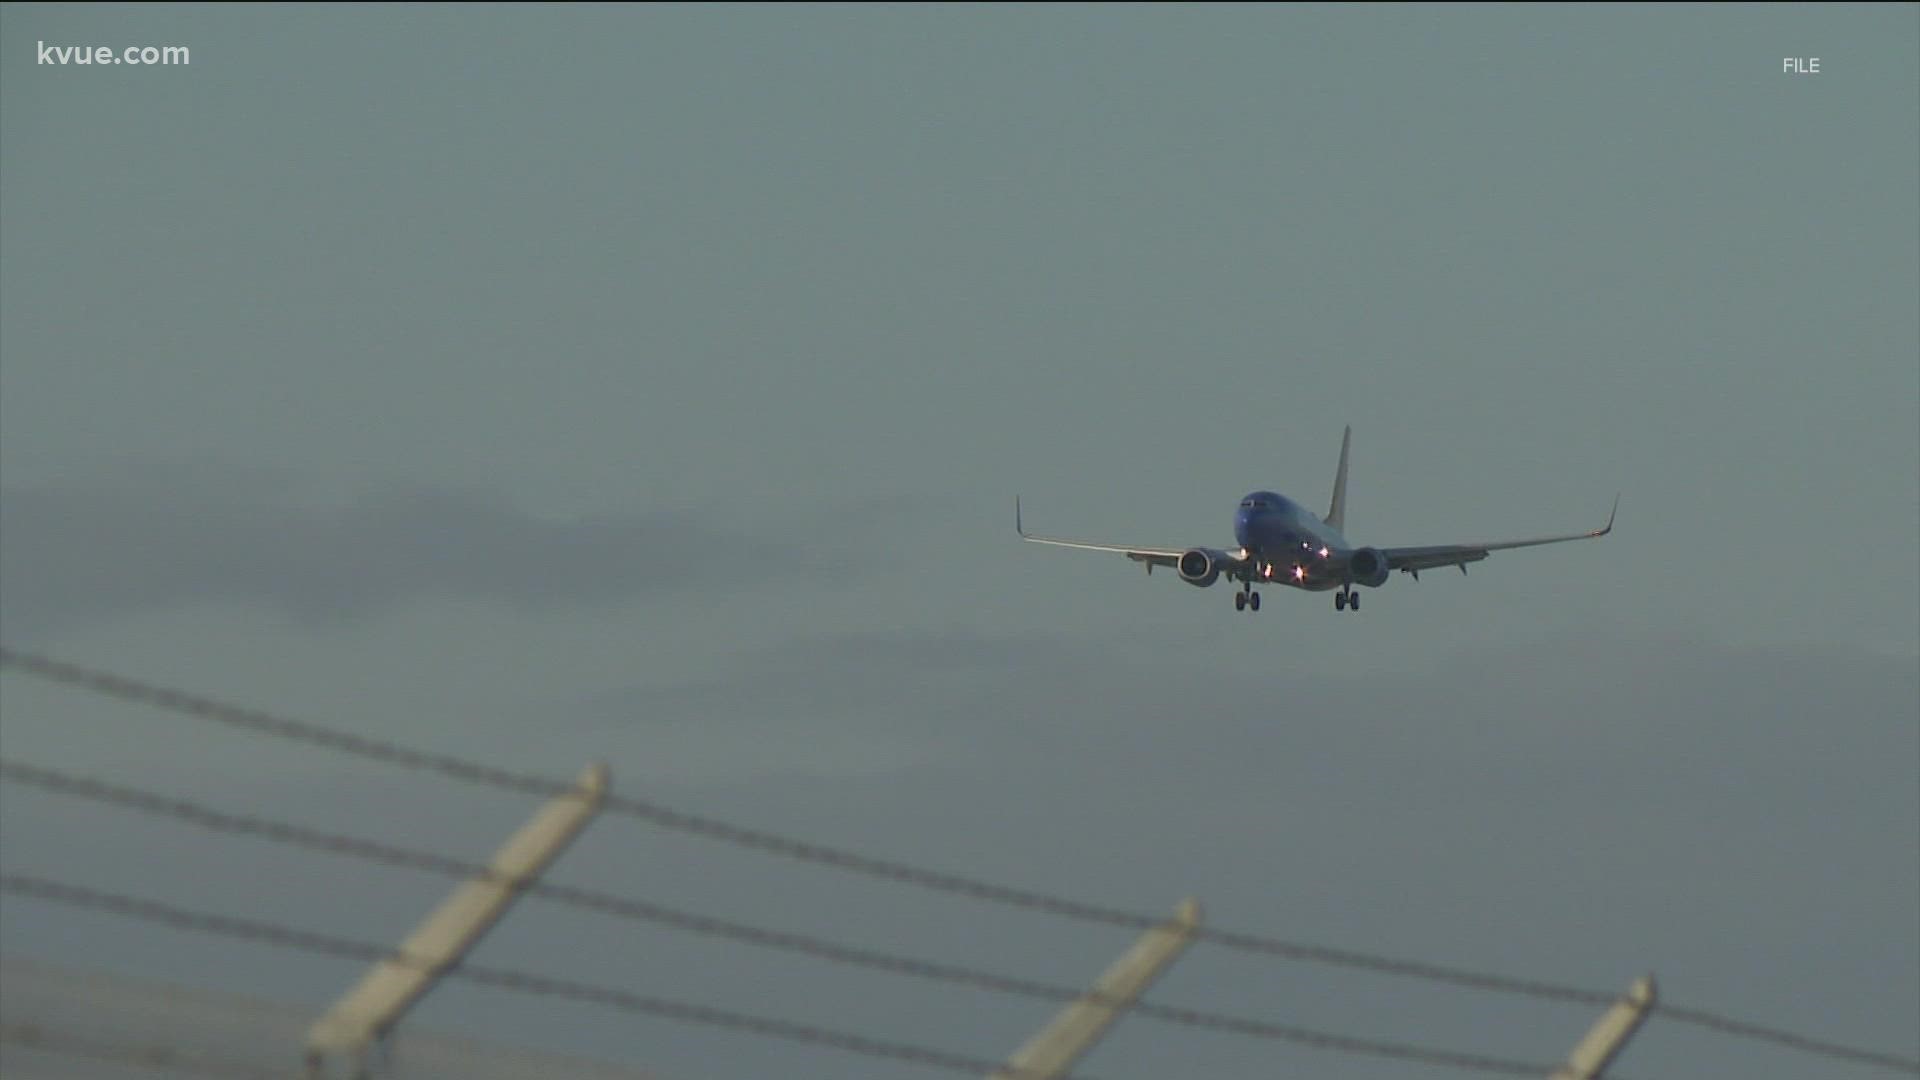 The FAA says the buffer will minimize any potential interference during low-visibility landings.